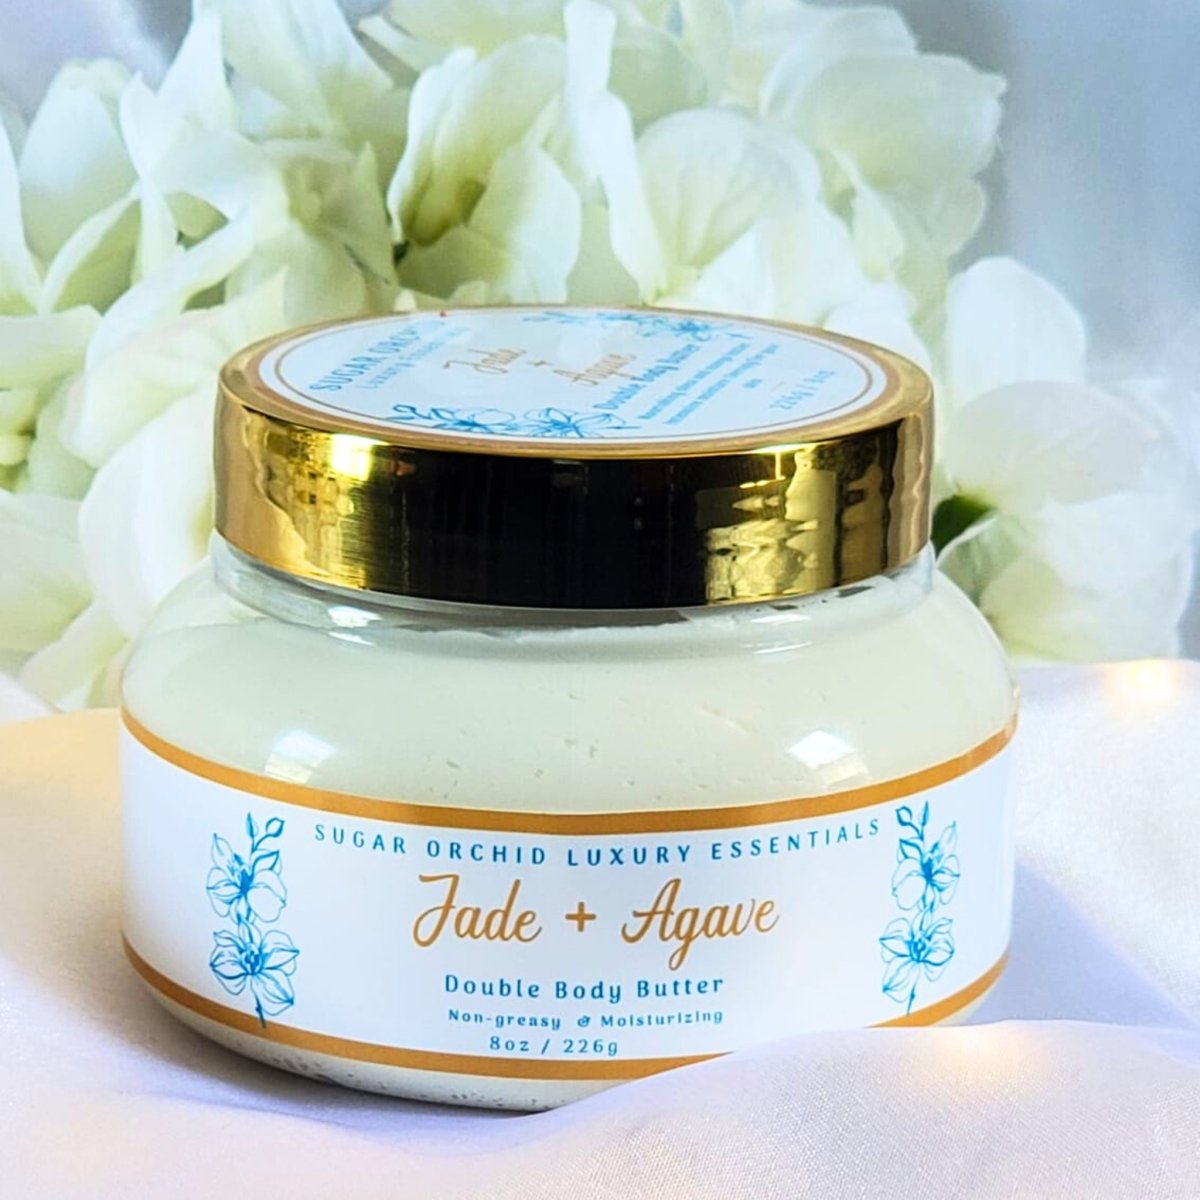 Jade and Agave - Body Butter - Sugar Orchid Luxury Essentials